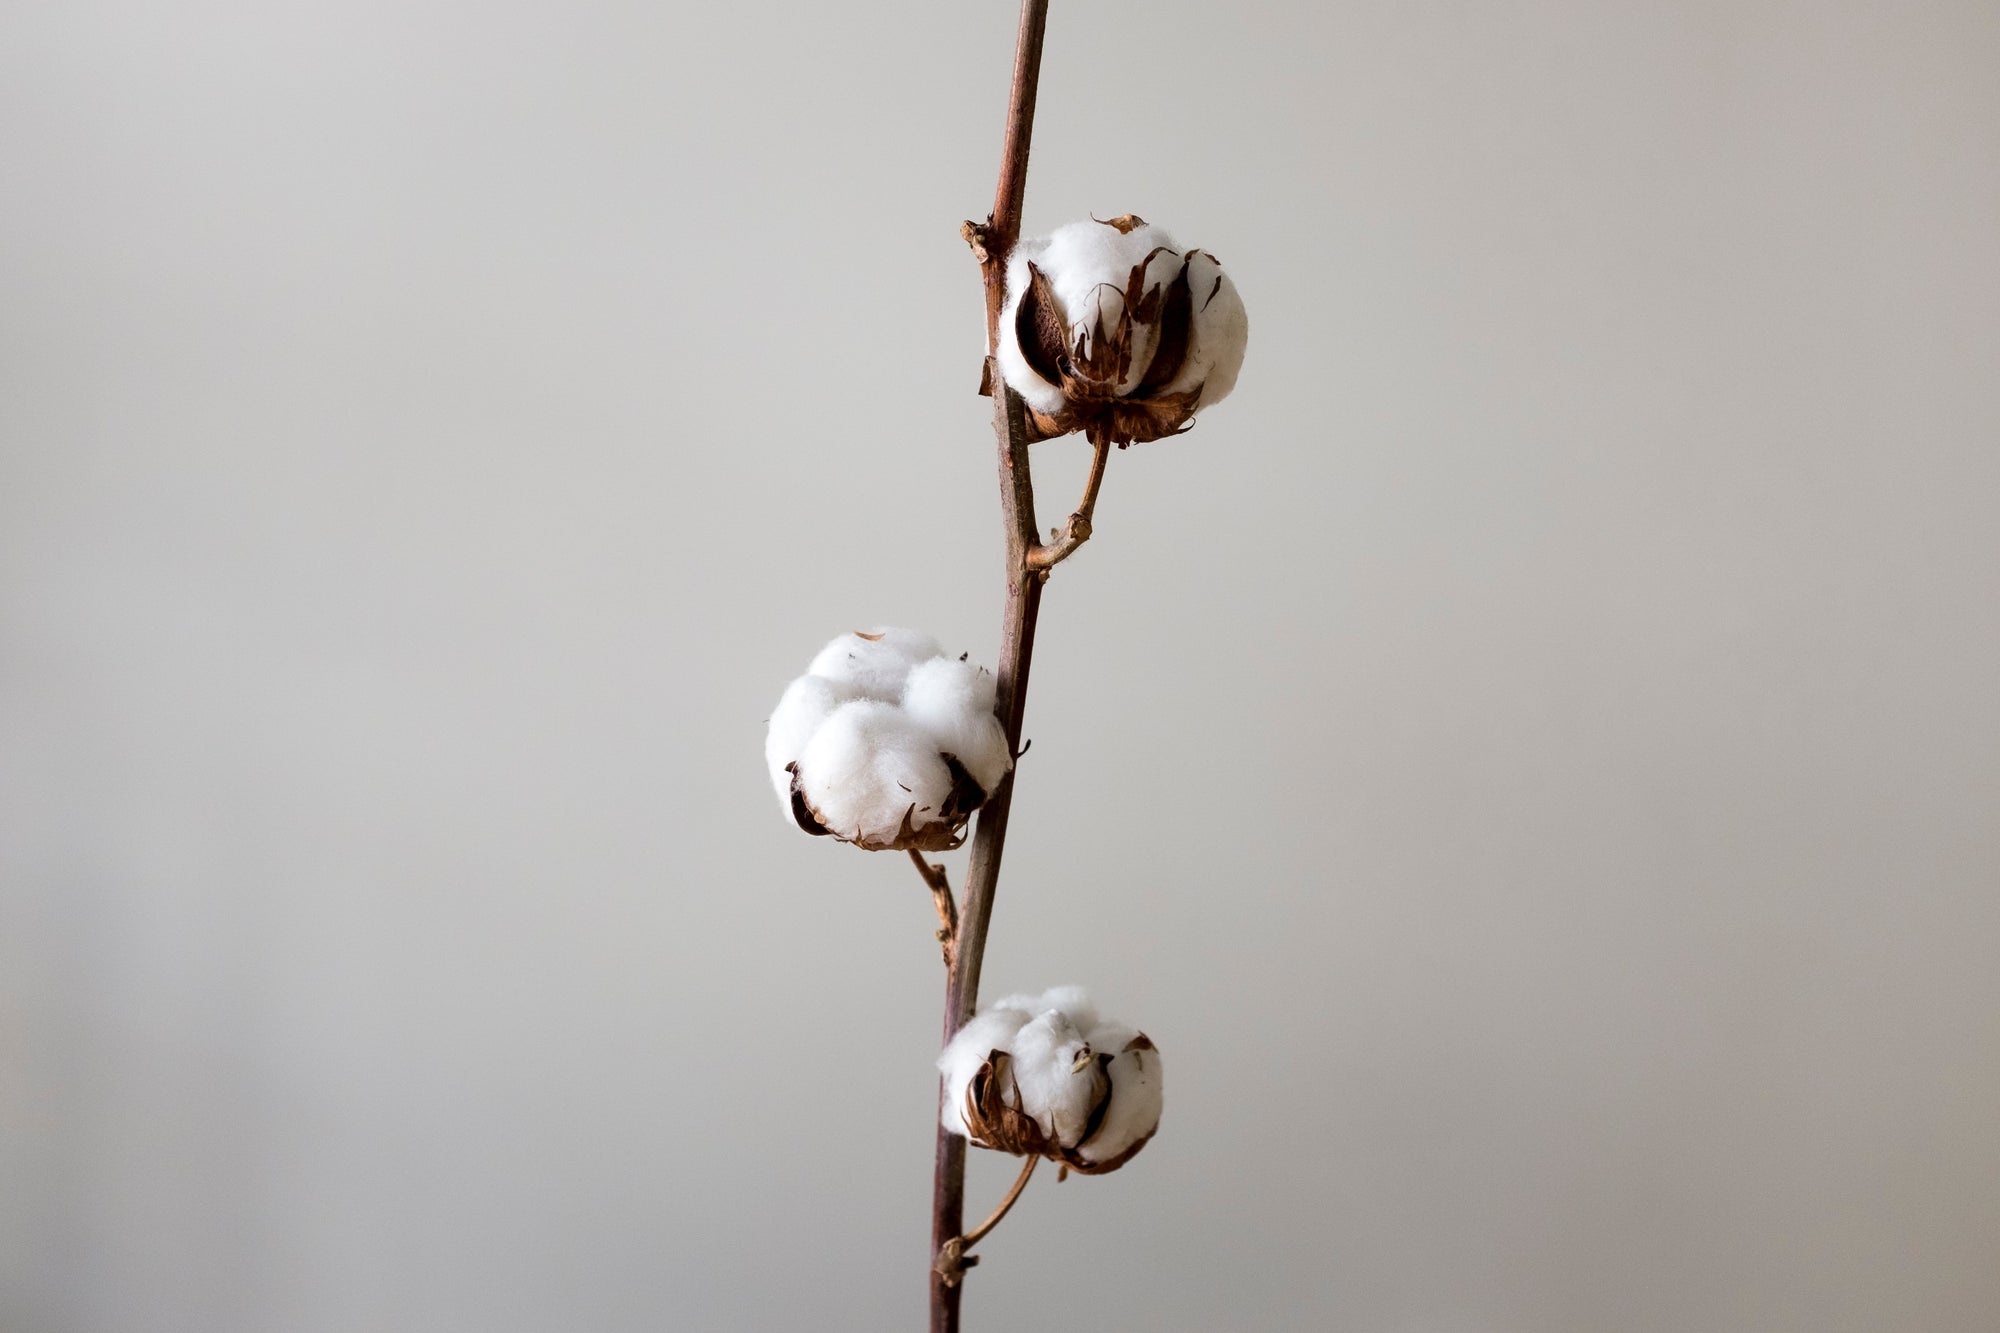 Organic Cotton Certifications - Which Is Best?